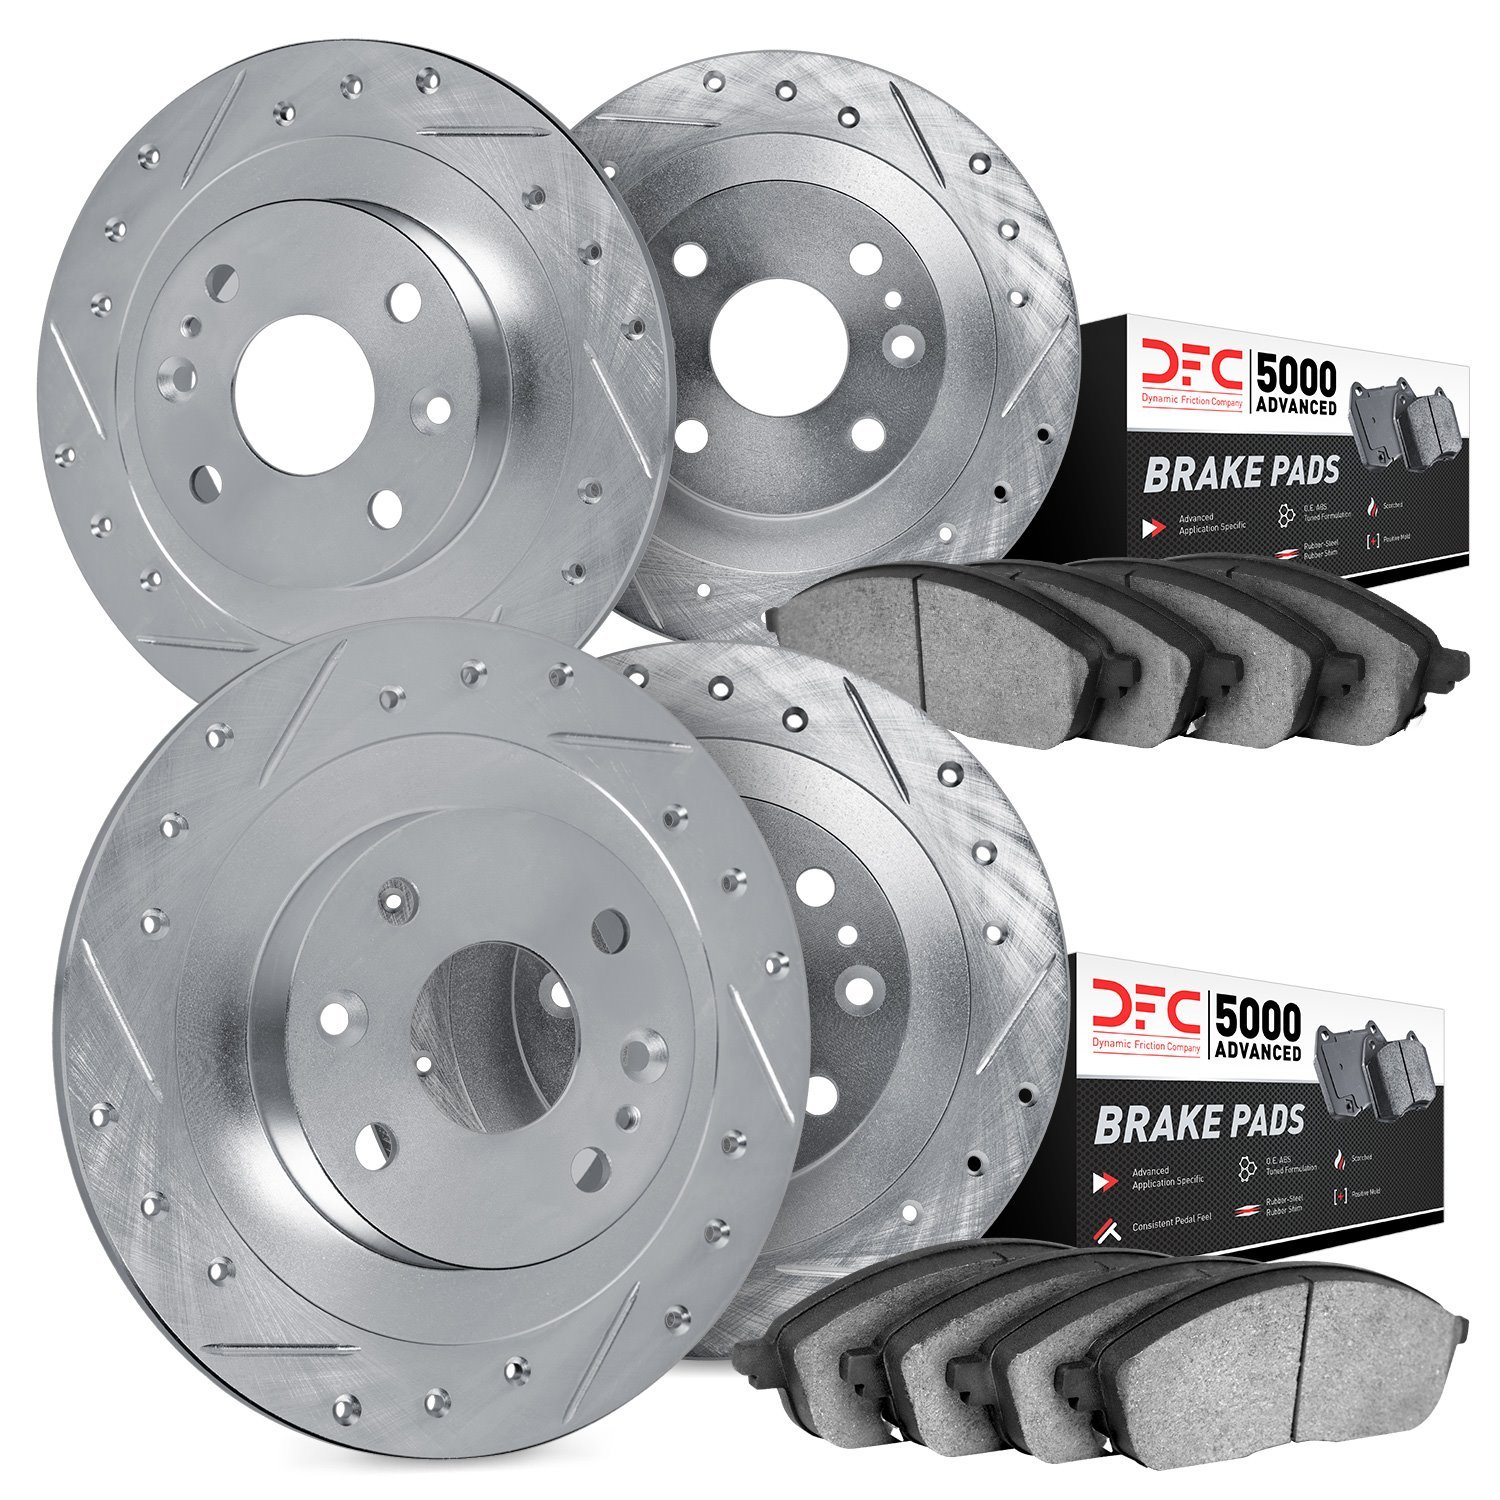 7504-07010 Drilled/Slotted Brake Rotors w/5000 Advanced Brake Pads Kit [Silver], 1968-1988 Multiple Makes/Models, Position: Fron